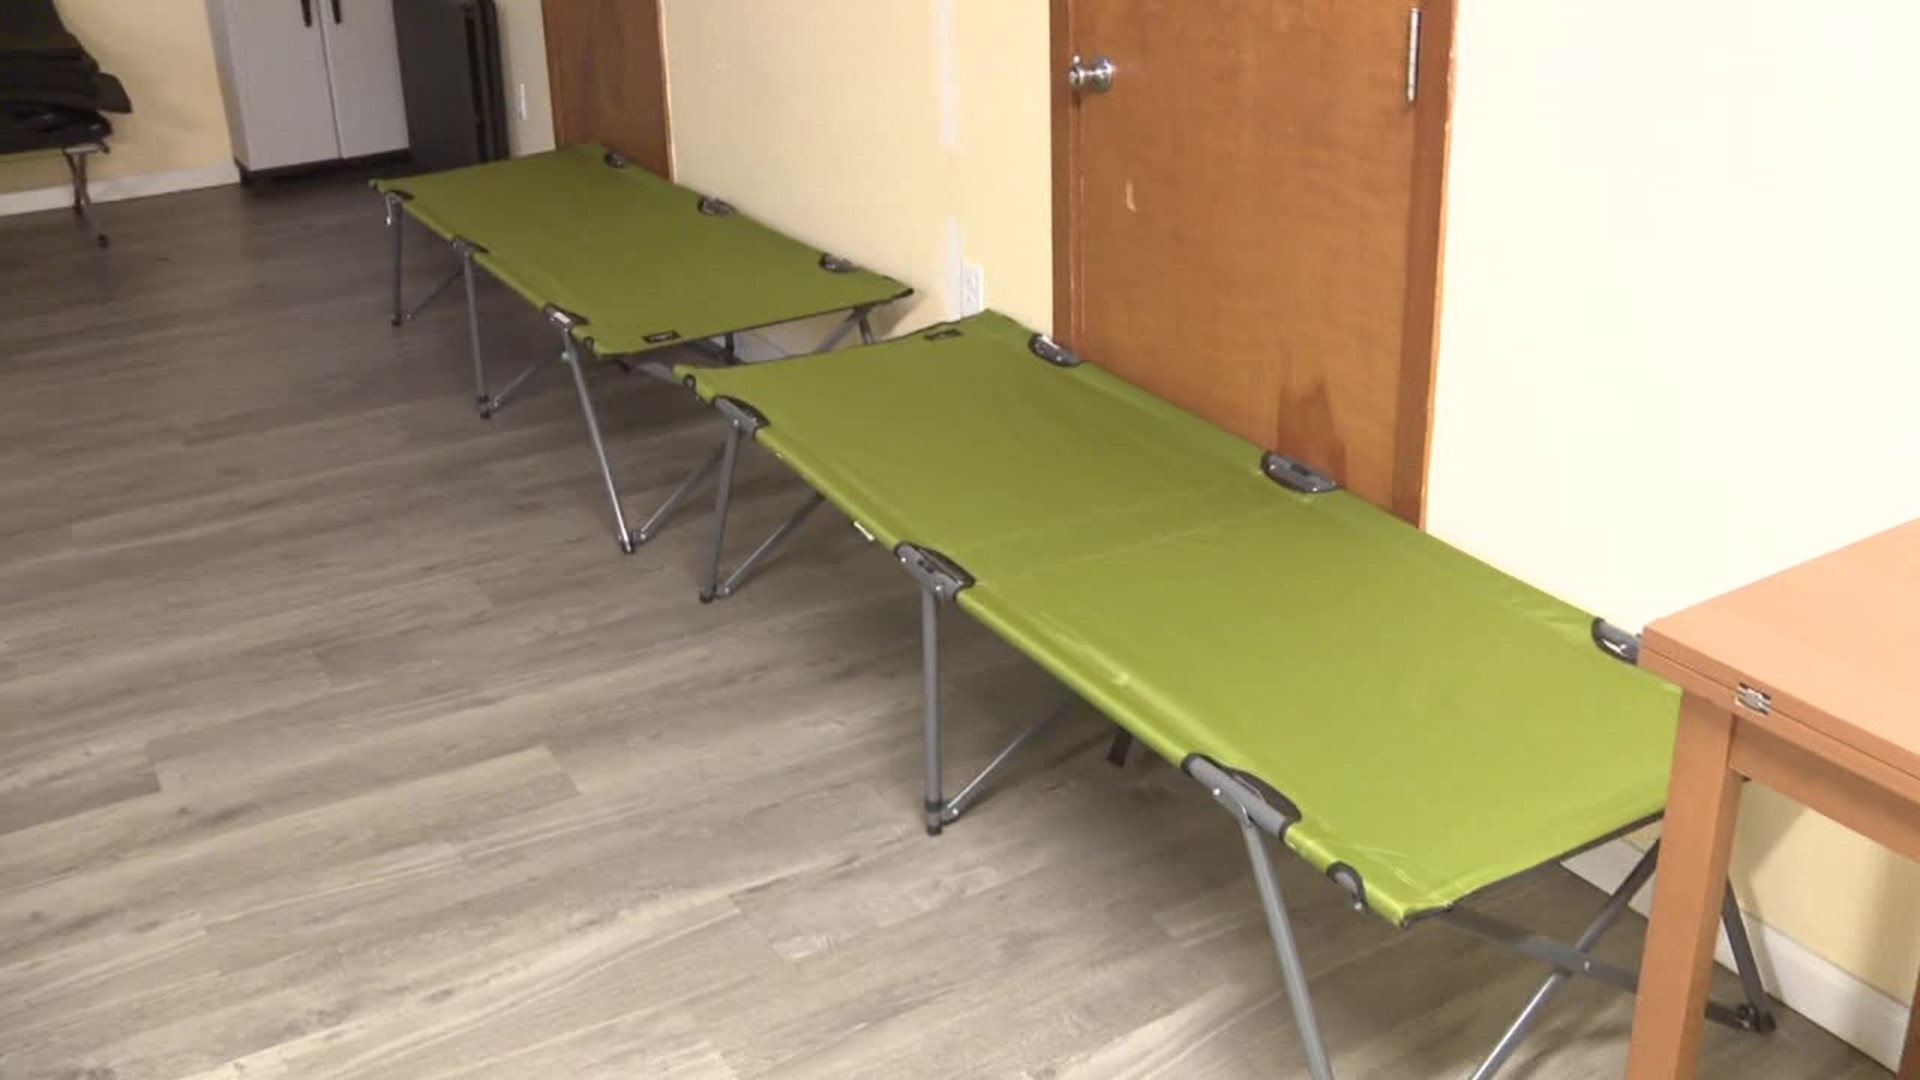 As frigid temperatures move into our area, an overnight shelter in Monroe County decided to open its doors early for those in need.